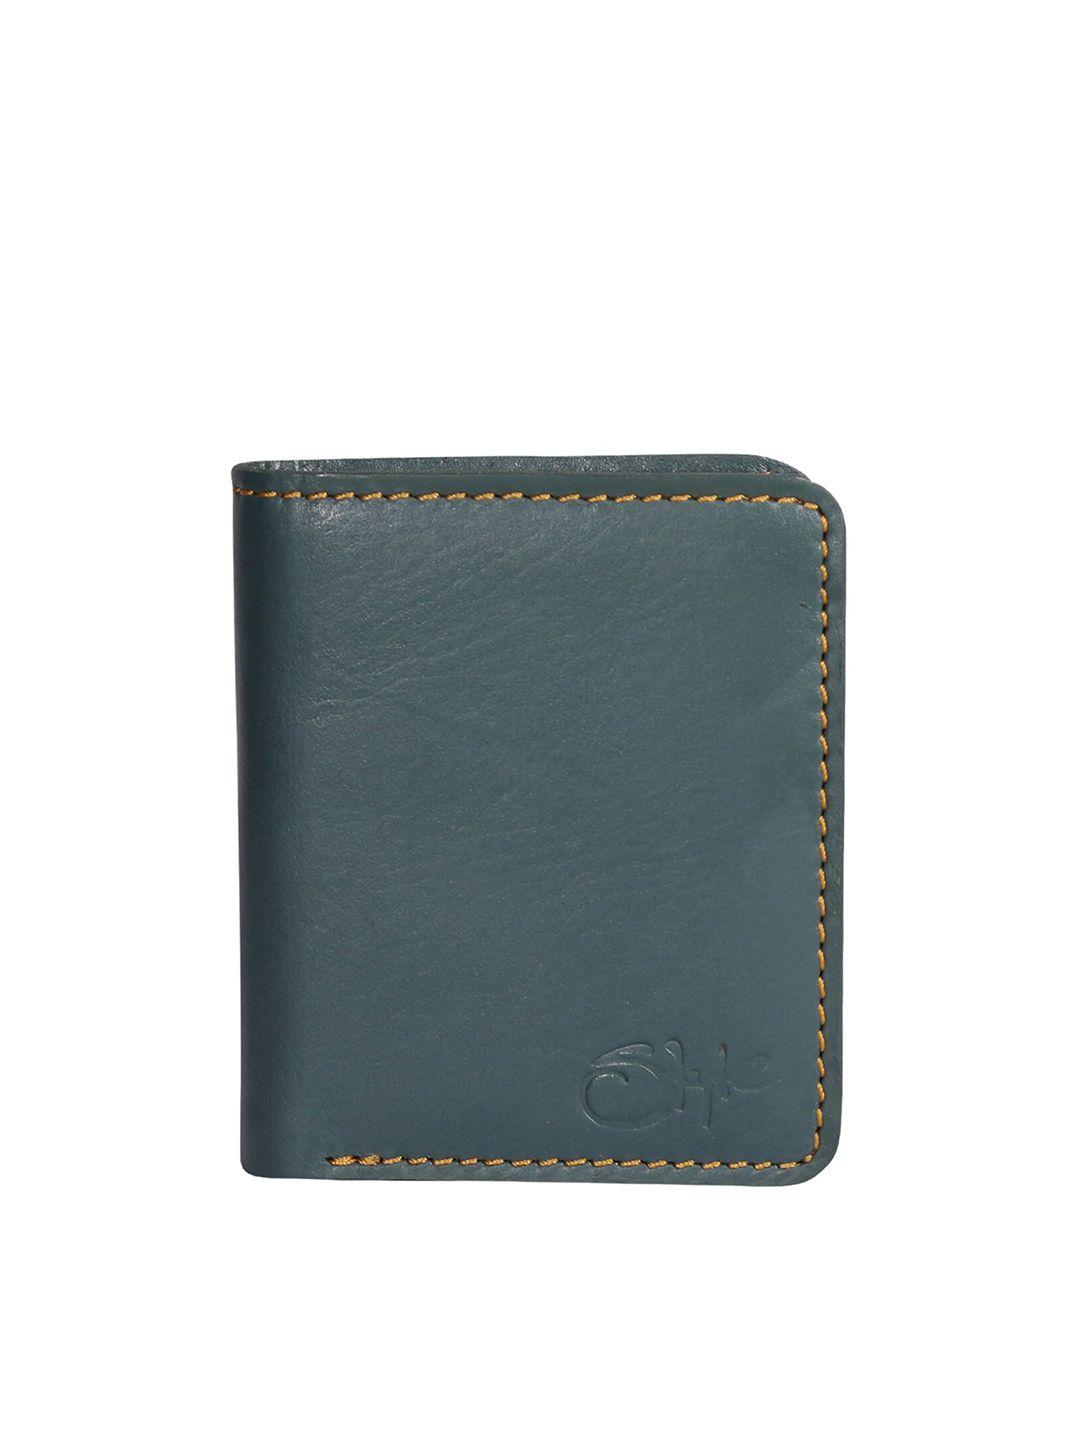 style shoes men green leather two fold wallet